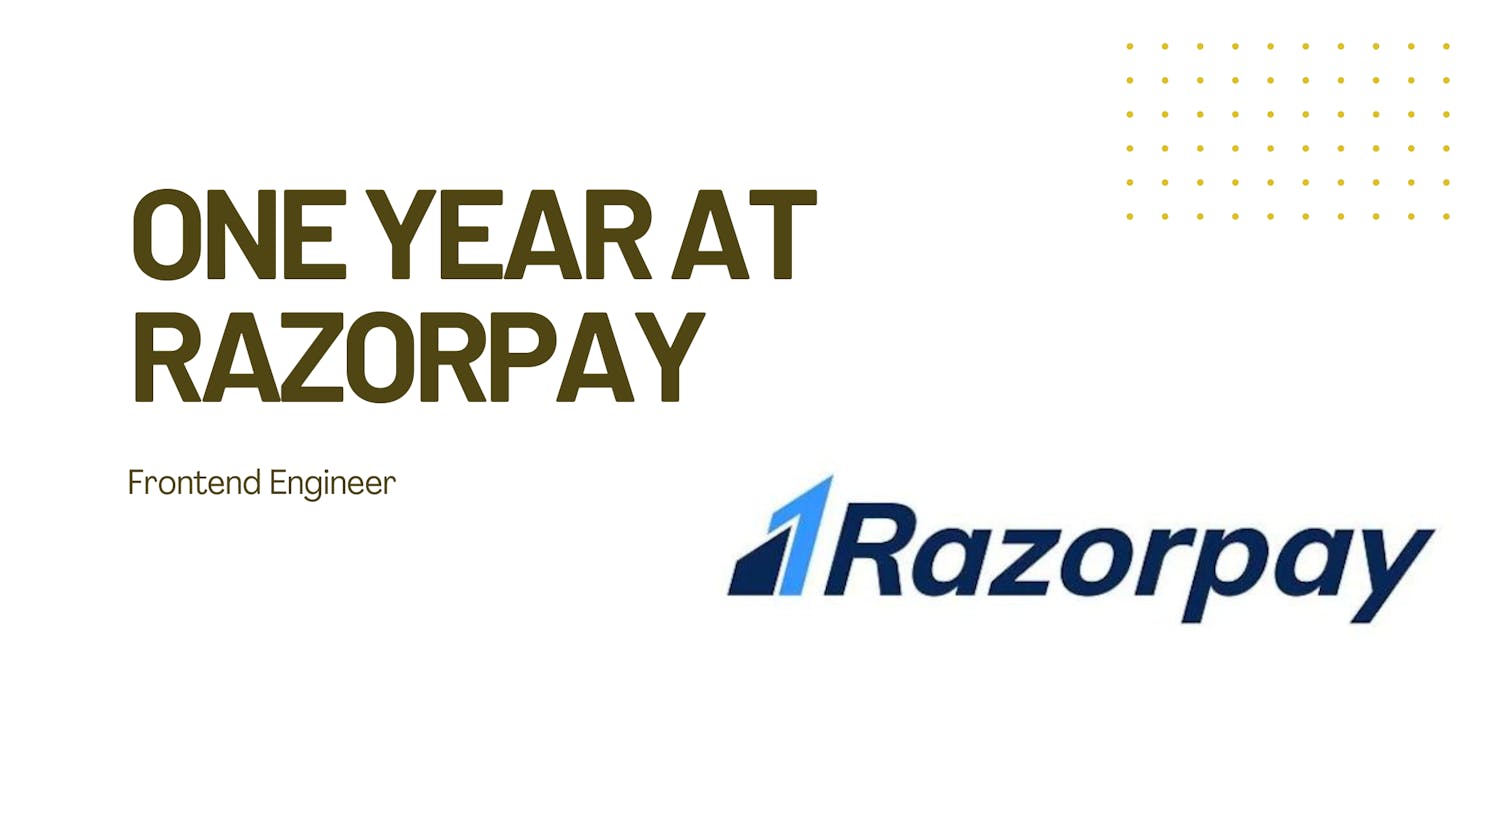 A year @Razorpay as Frontend Engineer